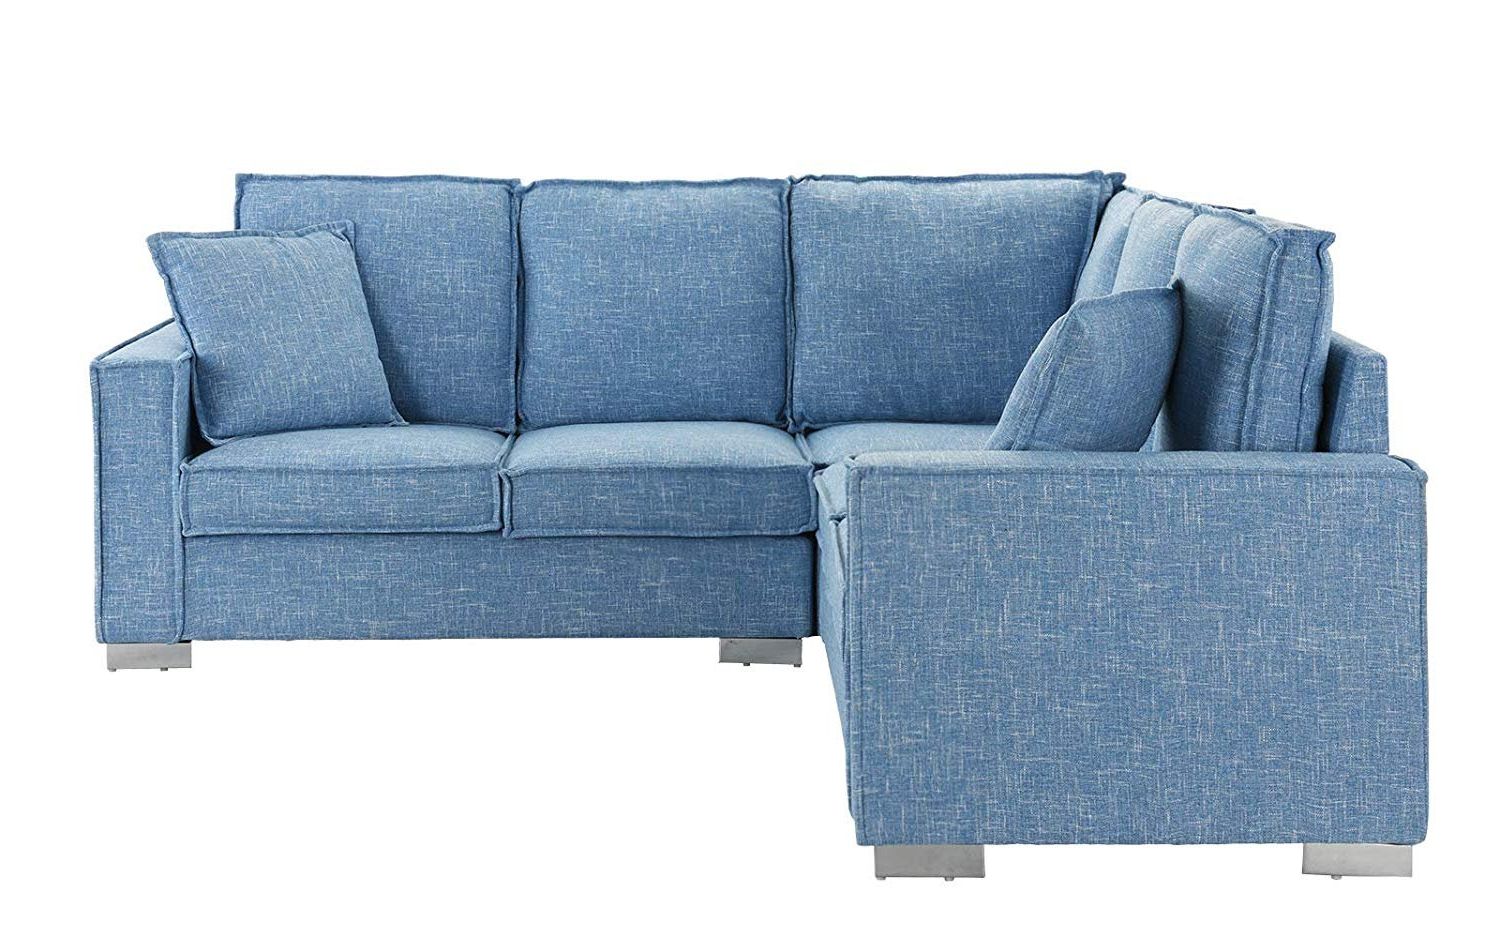 Modern Living Room Linen Fabric Sectional Sofa, L Shape Couch, 2 Intended For Modern Blue Linen Sofas (View 2 of 20)